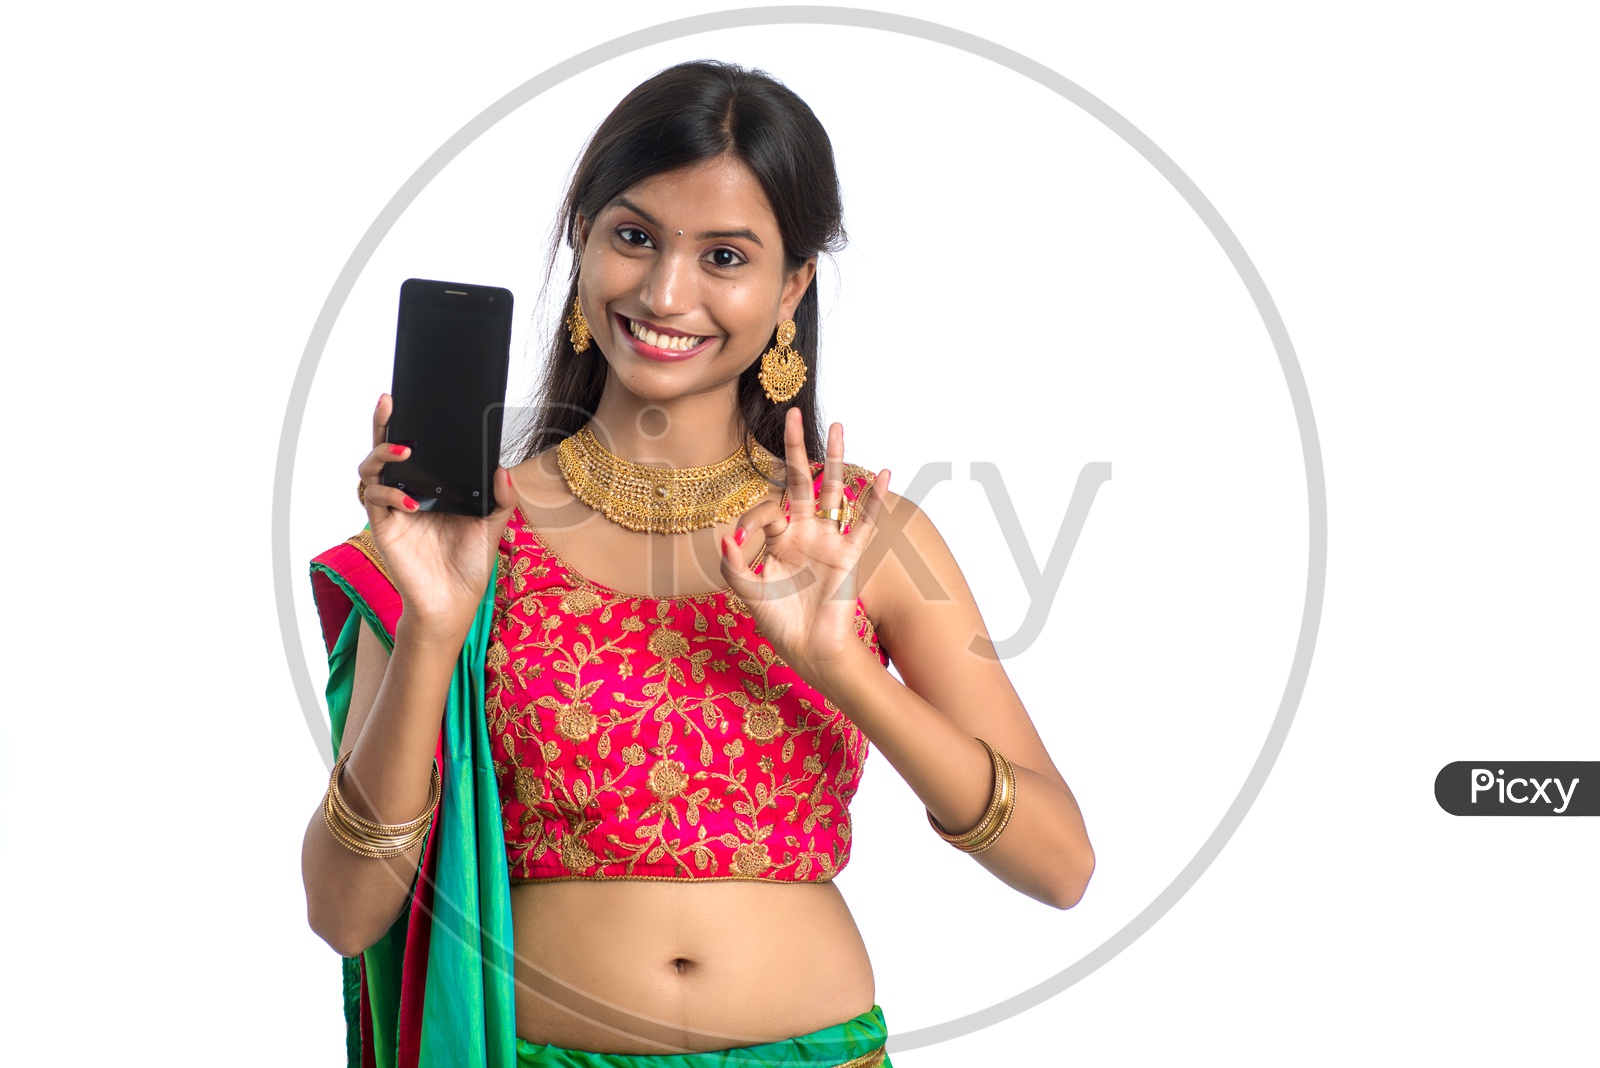 Portrait of a Young Traditional Indian  Woman  Showing Mobile Screen With an Expression and  a Gesture  over a White Isolated Background